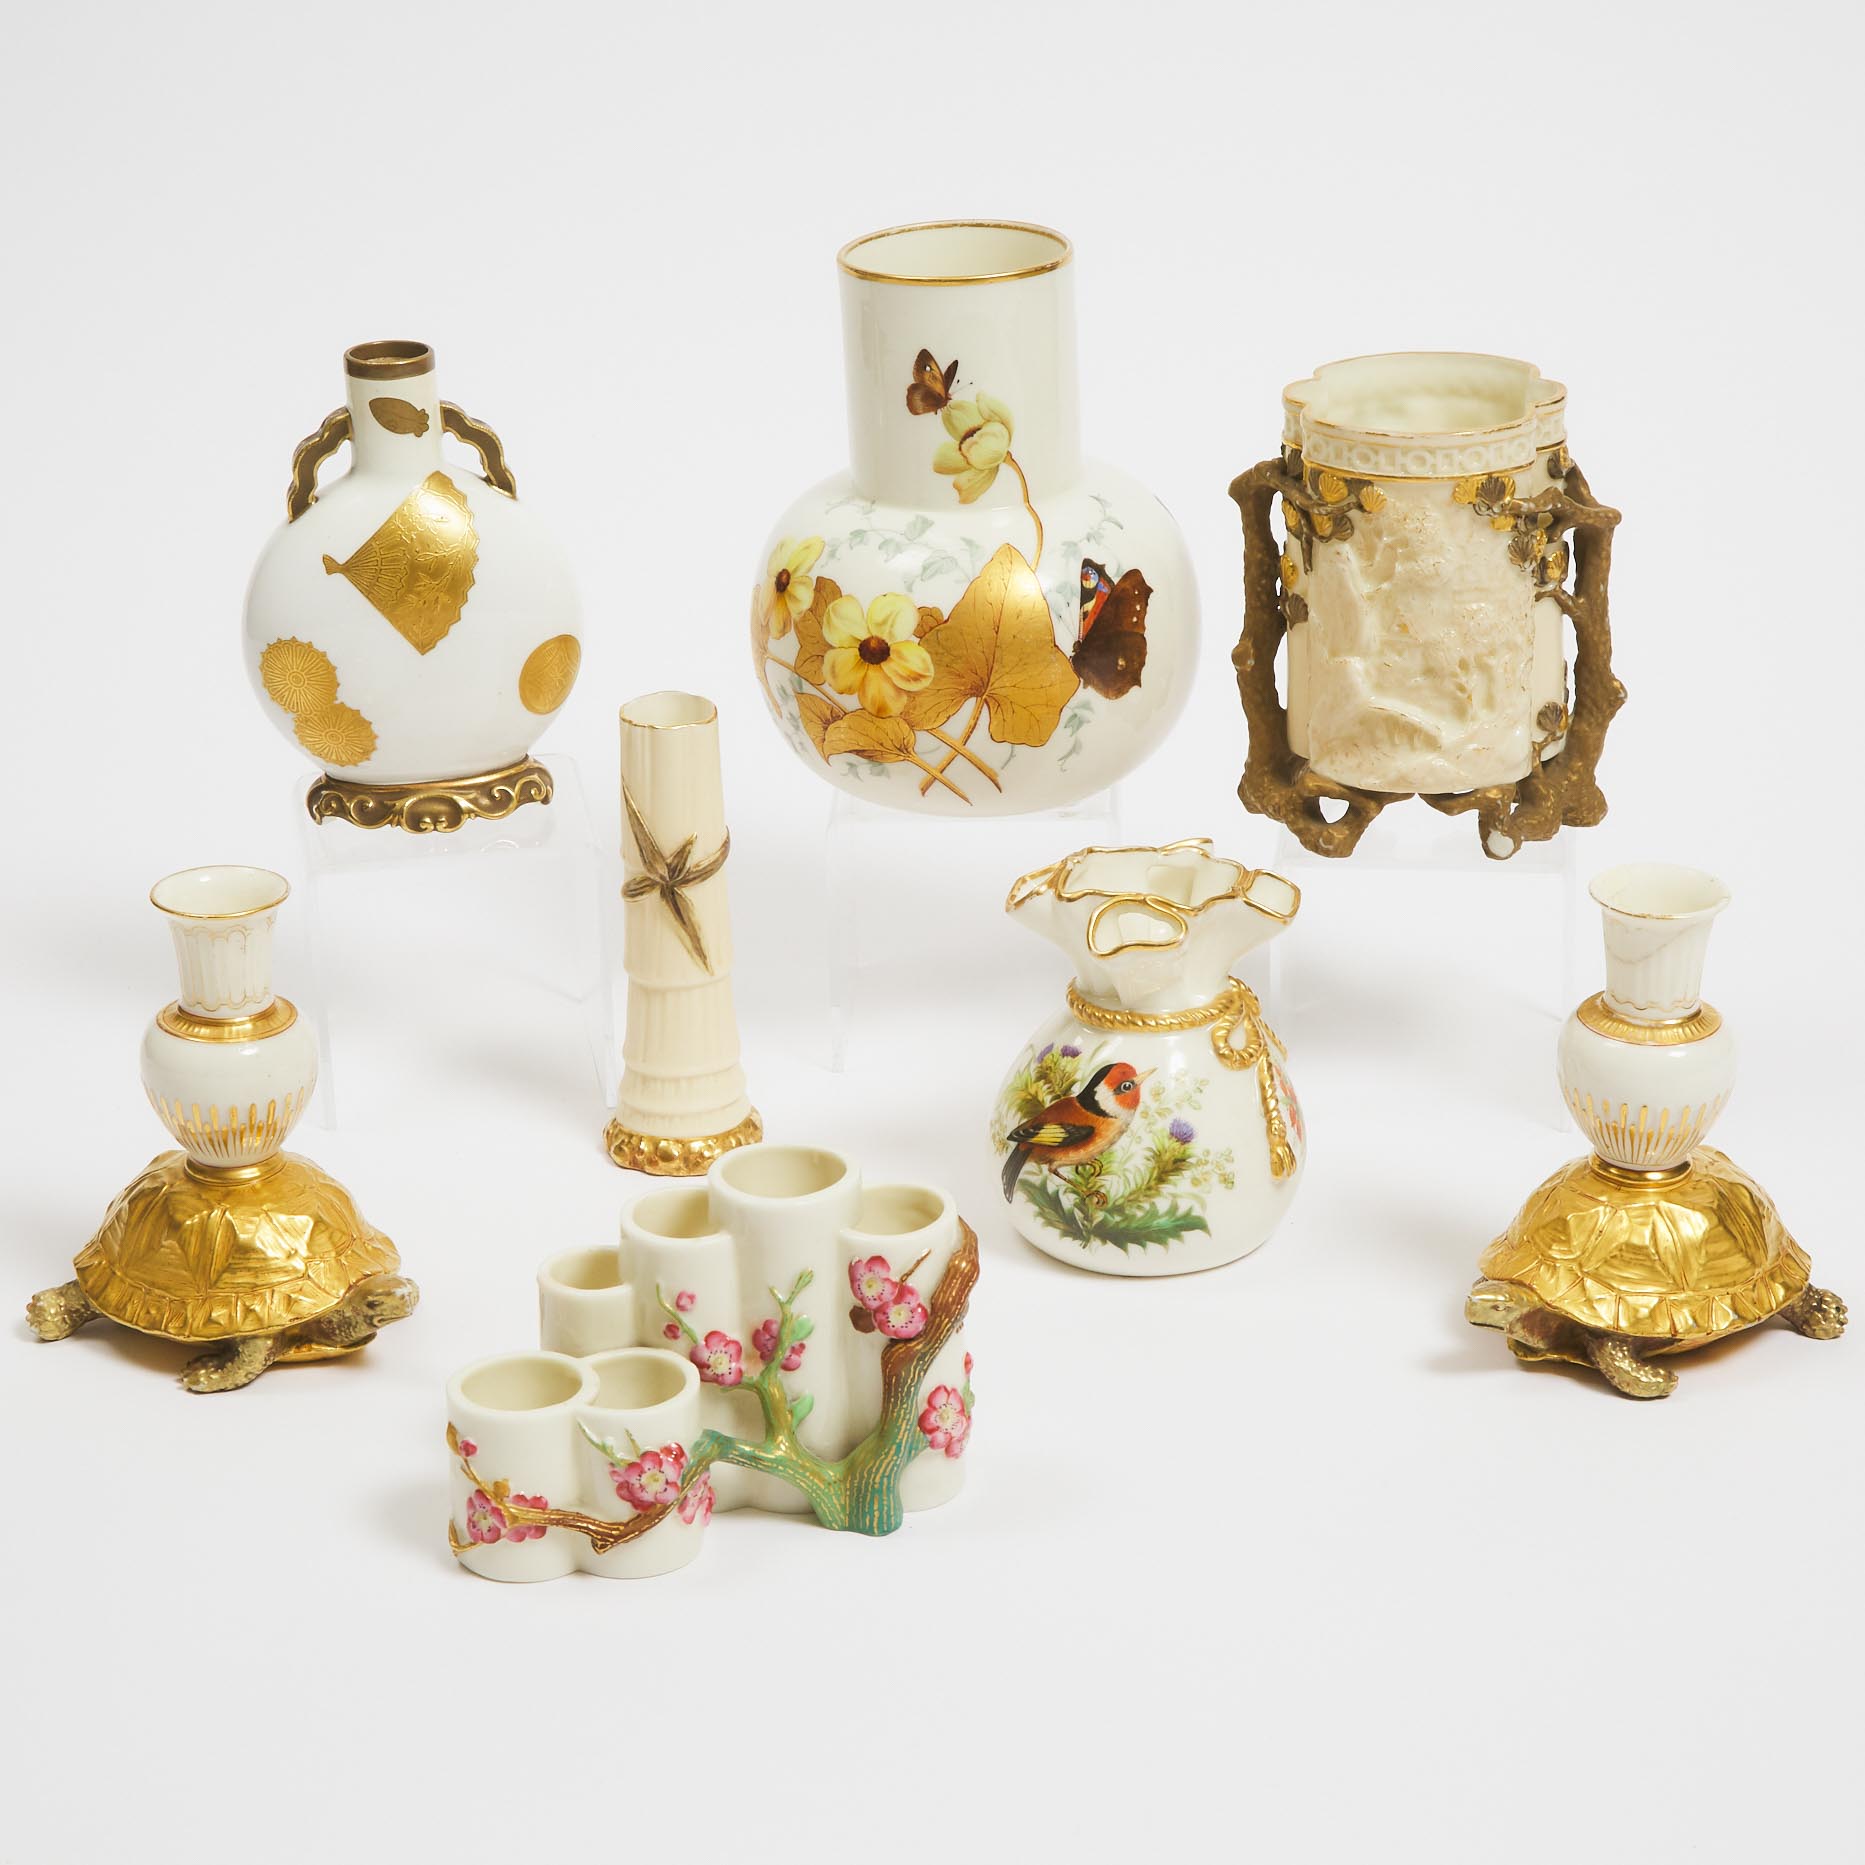 Group of Eight Royal Worcester Vases, c.1875-1900